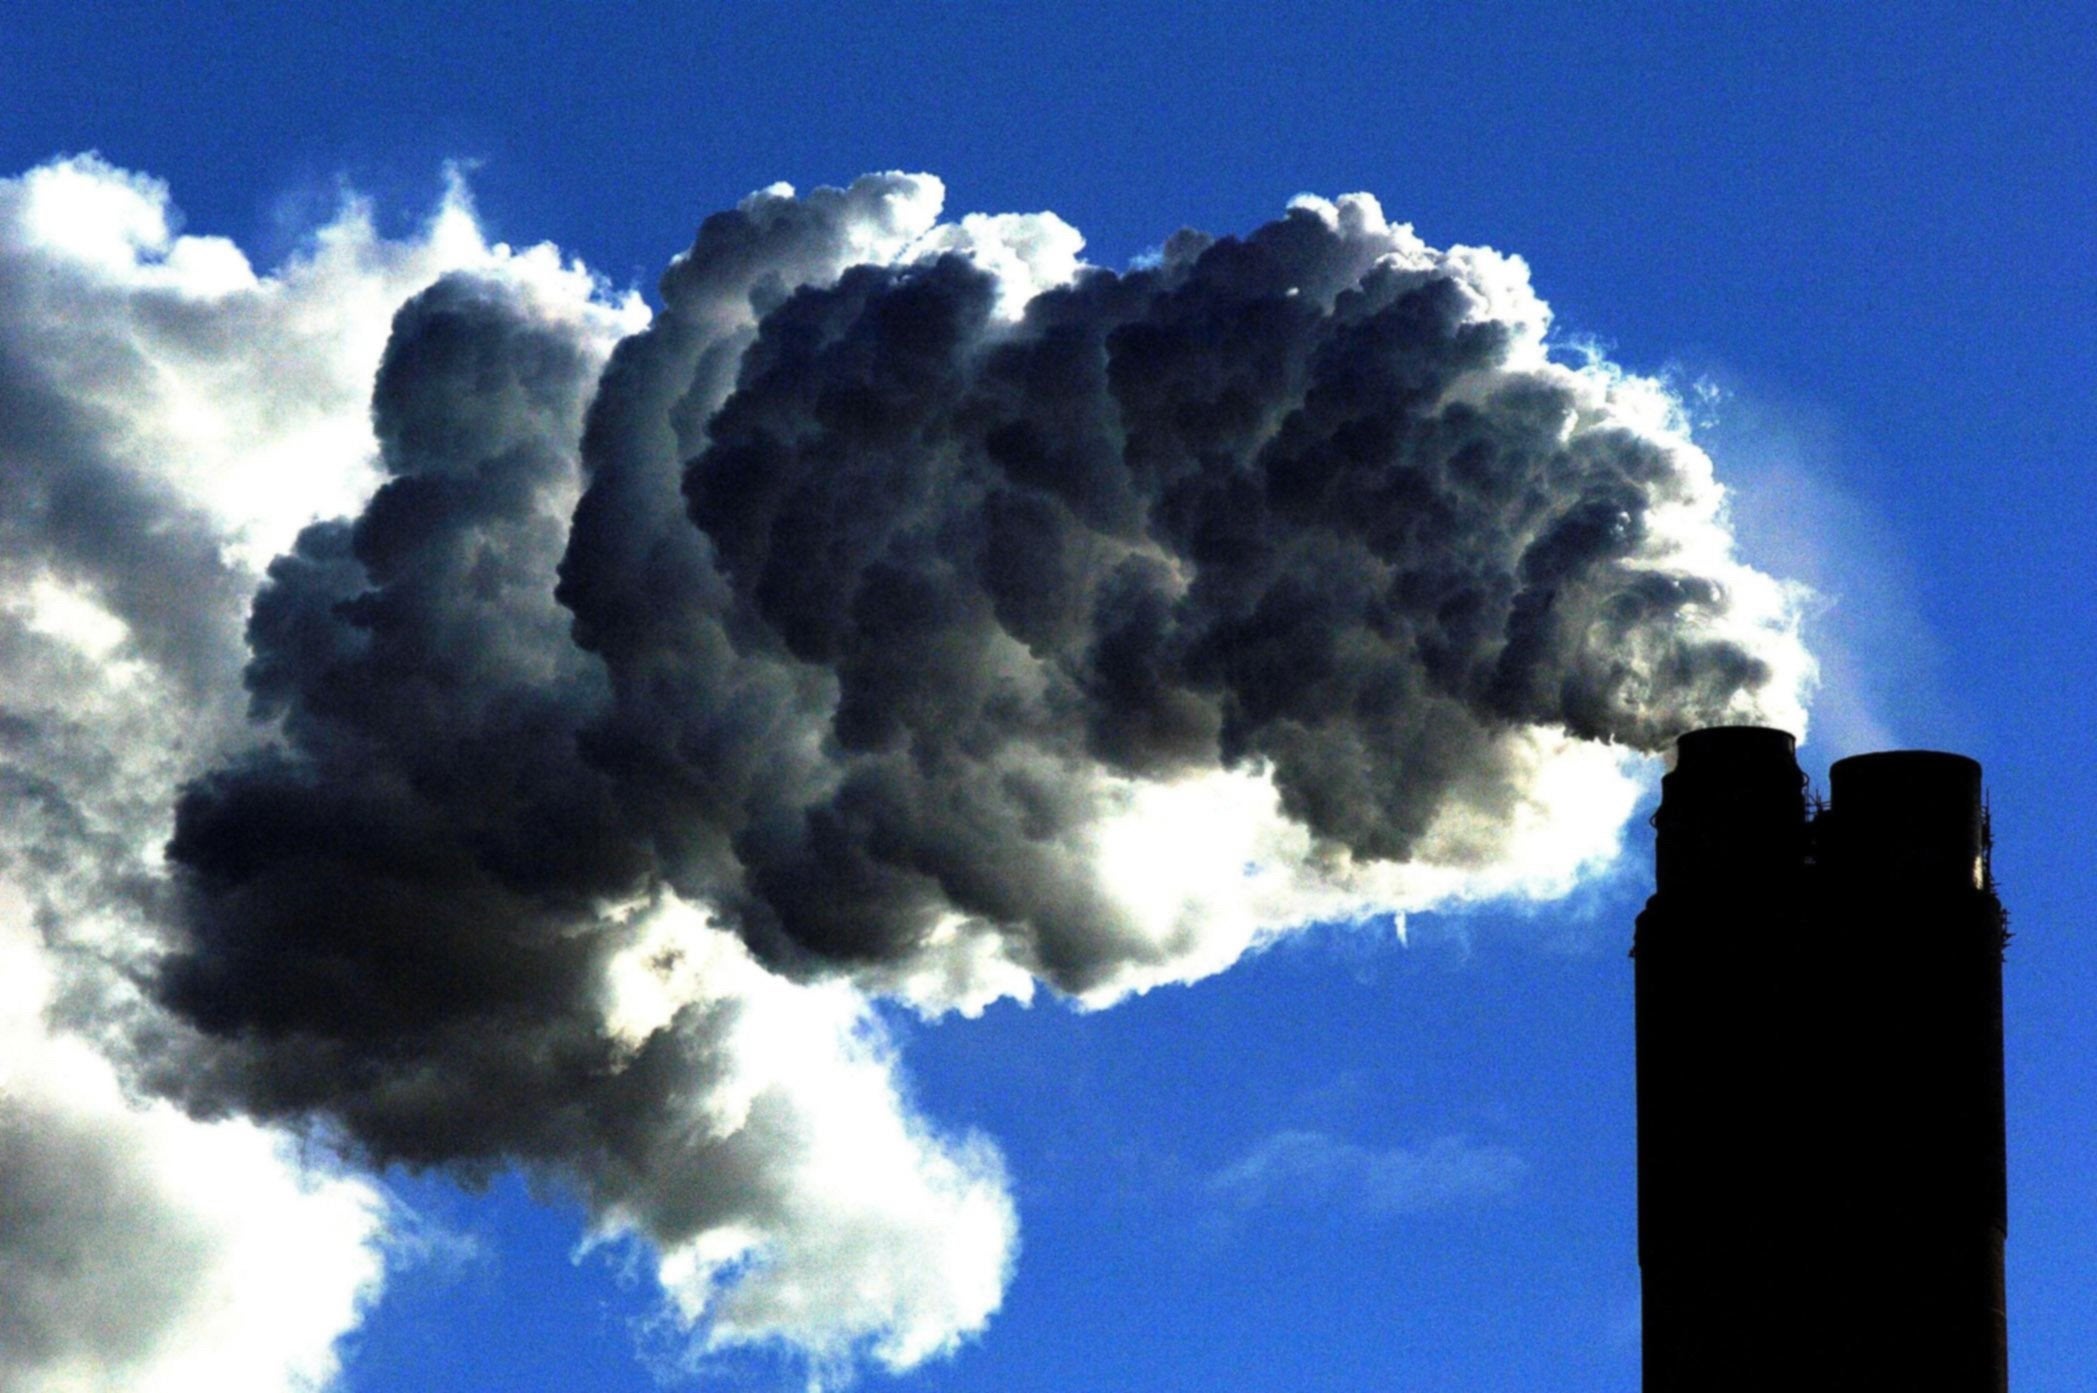 ‘It is still possible to bridge the gap to ensure global warming stays well below 2C and 1.5C’